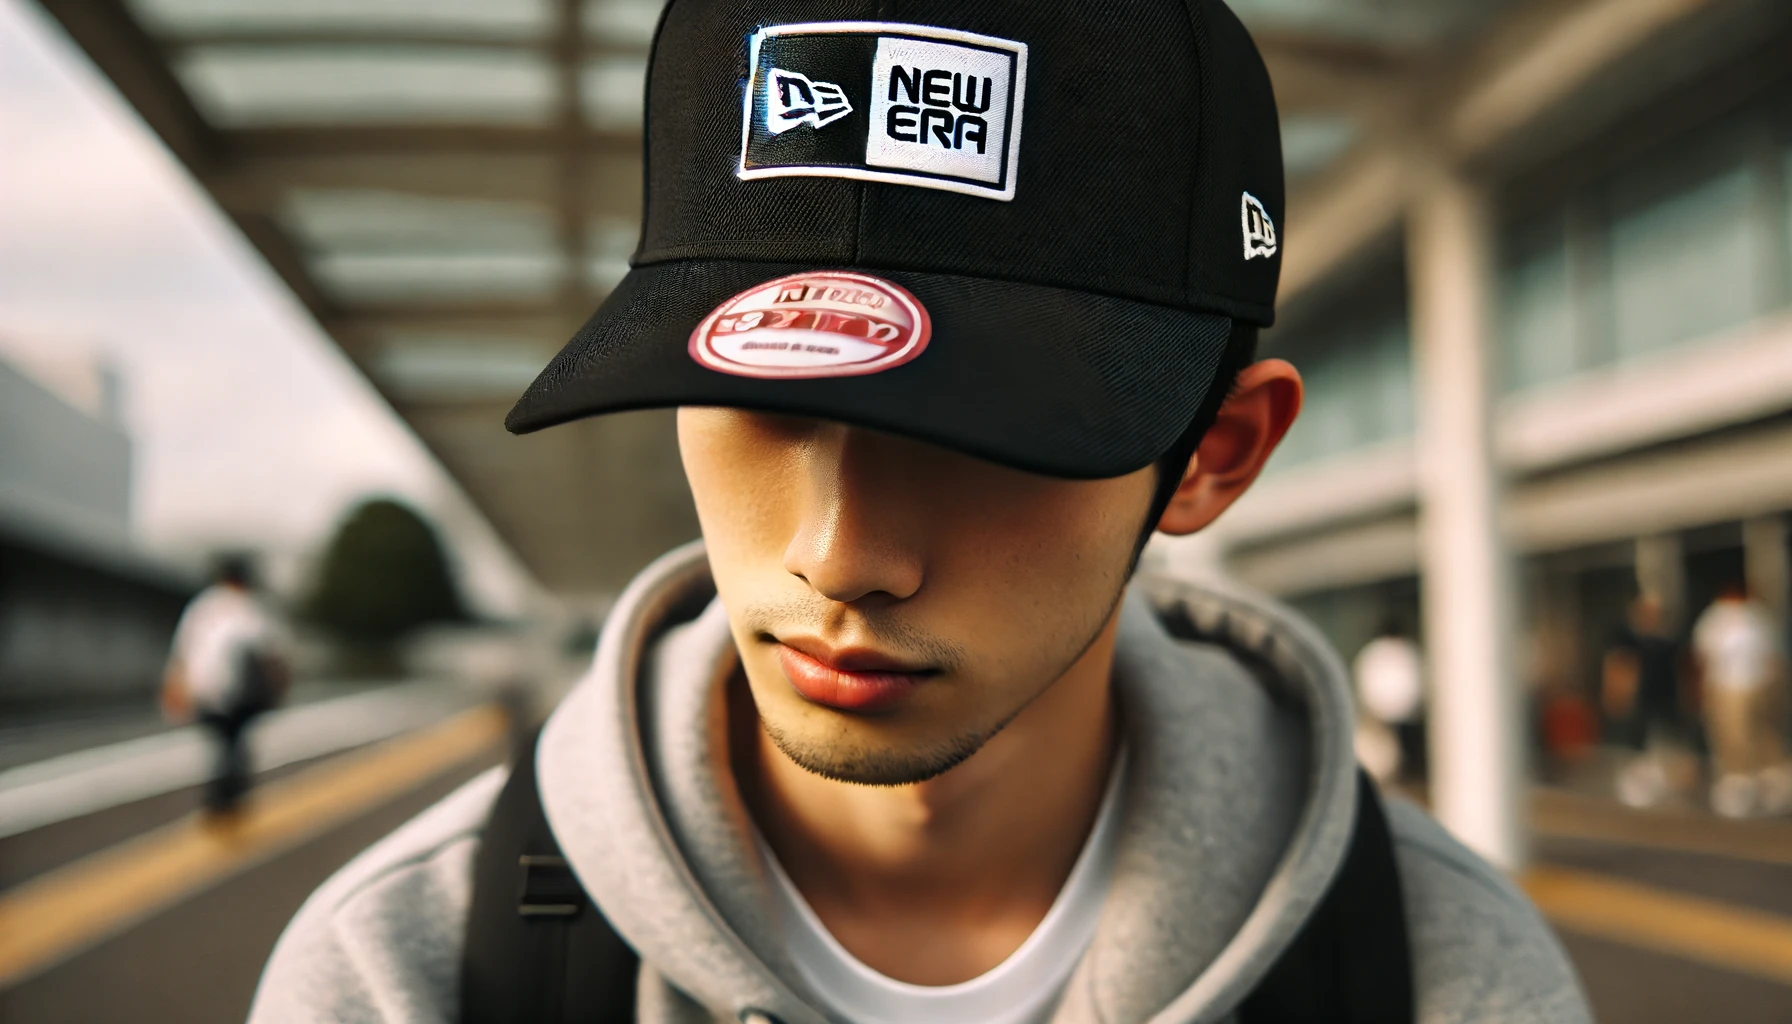 A Japanese person wearing a New Era cap without removing the sticker from the brim. The person is outdoors, and the sticker is clearly visible.